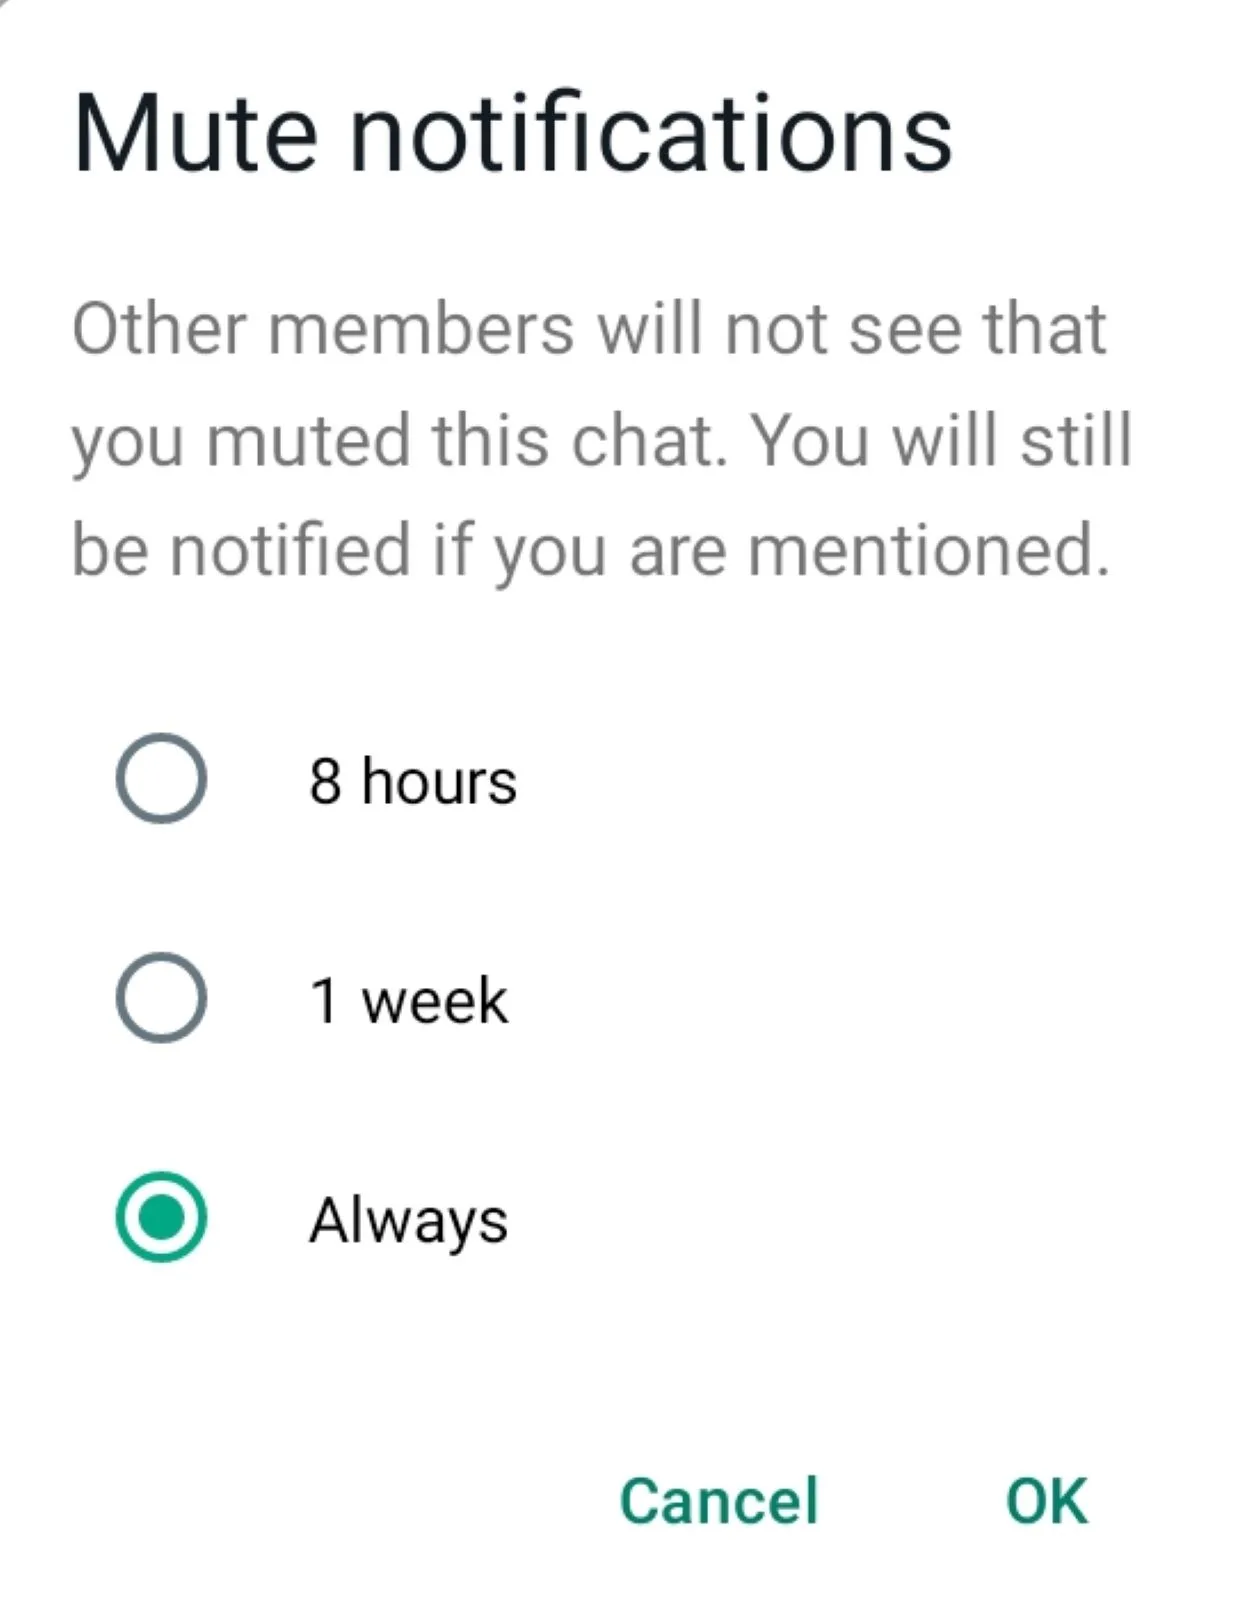 A prompt asking for how long would you want to mute the notifications.